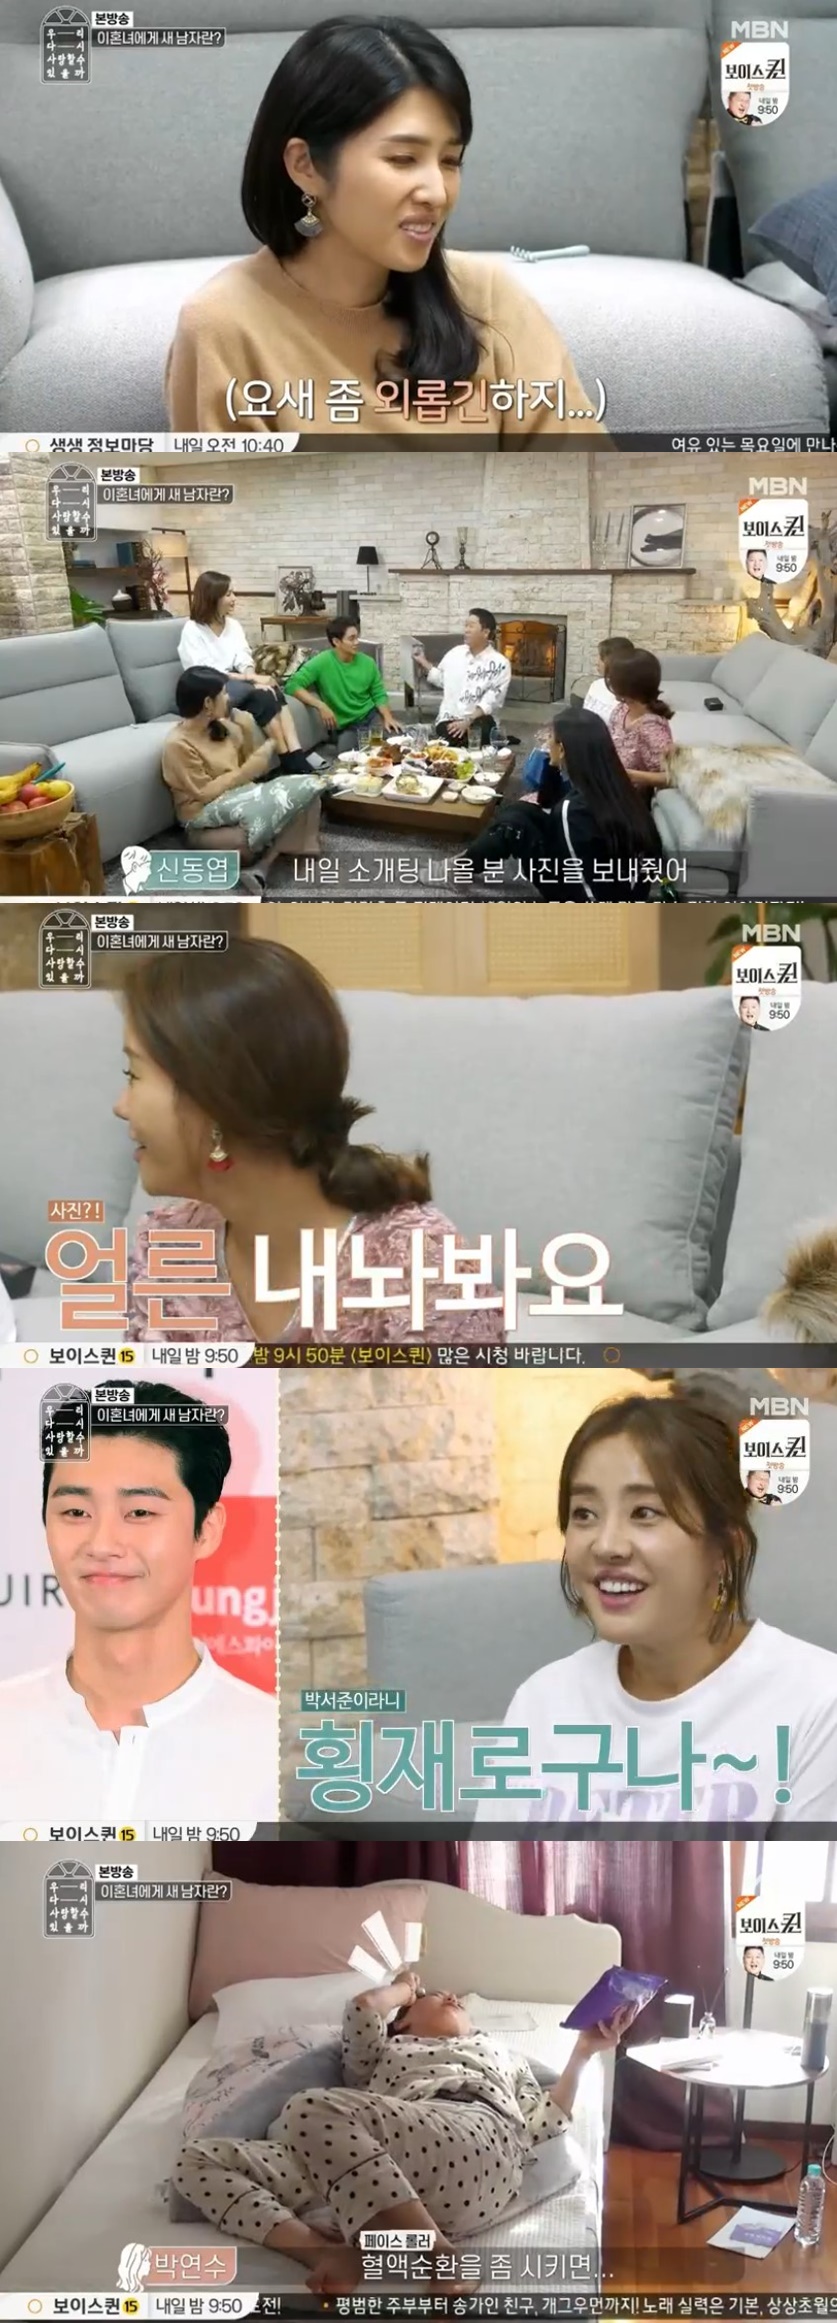 Park Yeon-soo came out as the first blind date in Udasa.On the second day of the Udasa House, the MBN entertainment program, Can We Love Again, which was broadcast on the 20th, was portrayed.Shin Dong-yup, who was saying that there was the first blind date, asked, What do you think everyone thinks?Park Eun-hye said, I think we should be someone who can love our children.Kim Kyung-ran also worried that Is there anyone who will look at me with a defect in divorce?For a moment, Shin Dong-yup said, The first blind date is already ready.In particular, Park Eun-hye asked, How tall are you? Shin Dong-yup laughed, saying, I love my child the most, and ask for the key.Shin Dong-yup said, Is not the side look like Park Seo-joon? And Park Yeon-soo said, I will do it first.The next morning, Park Yeon-soo was surprised to see the blind date days face was swollen.He rolled the face roller, put the ice pack on his face and tried to remove the swelling, laughing.